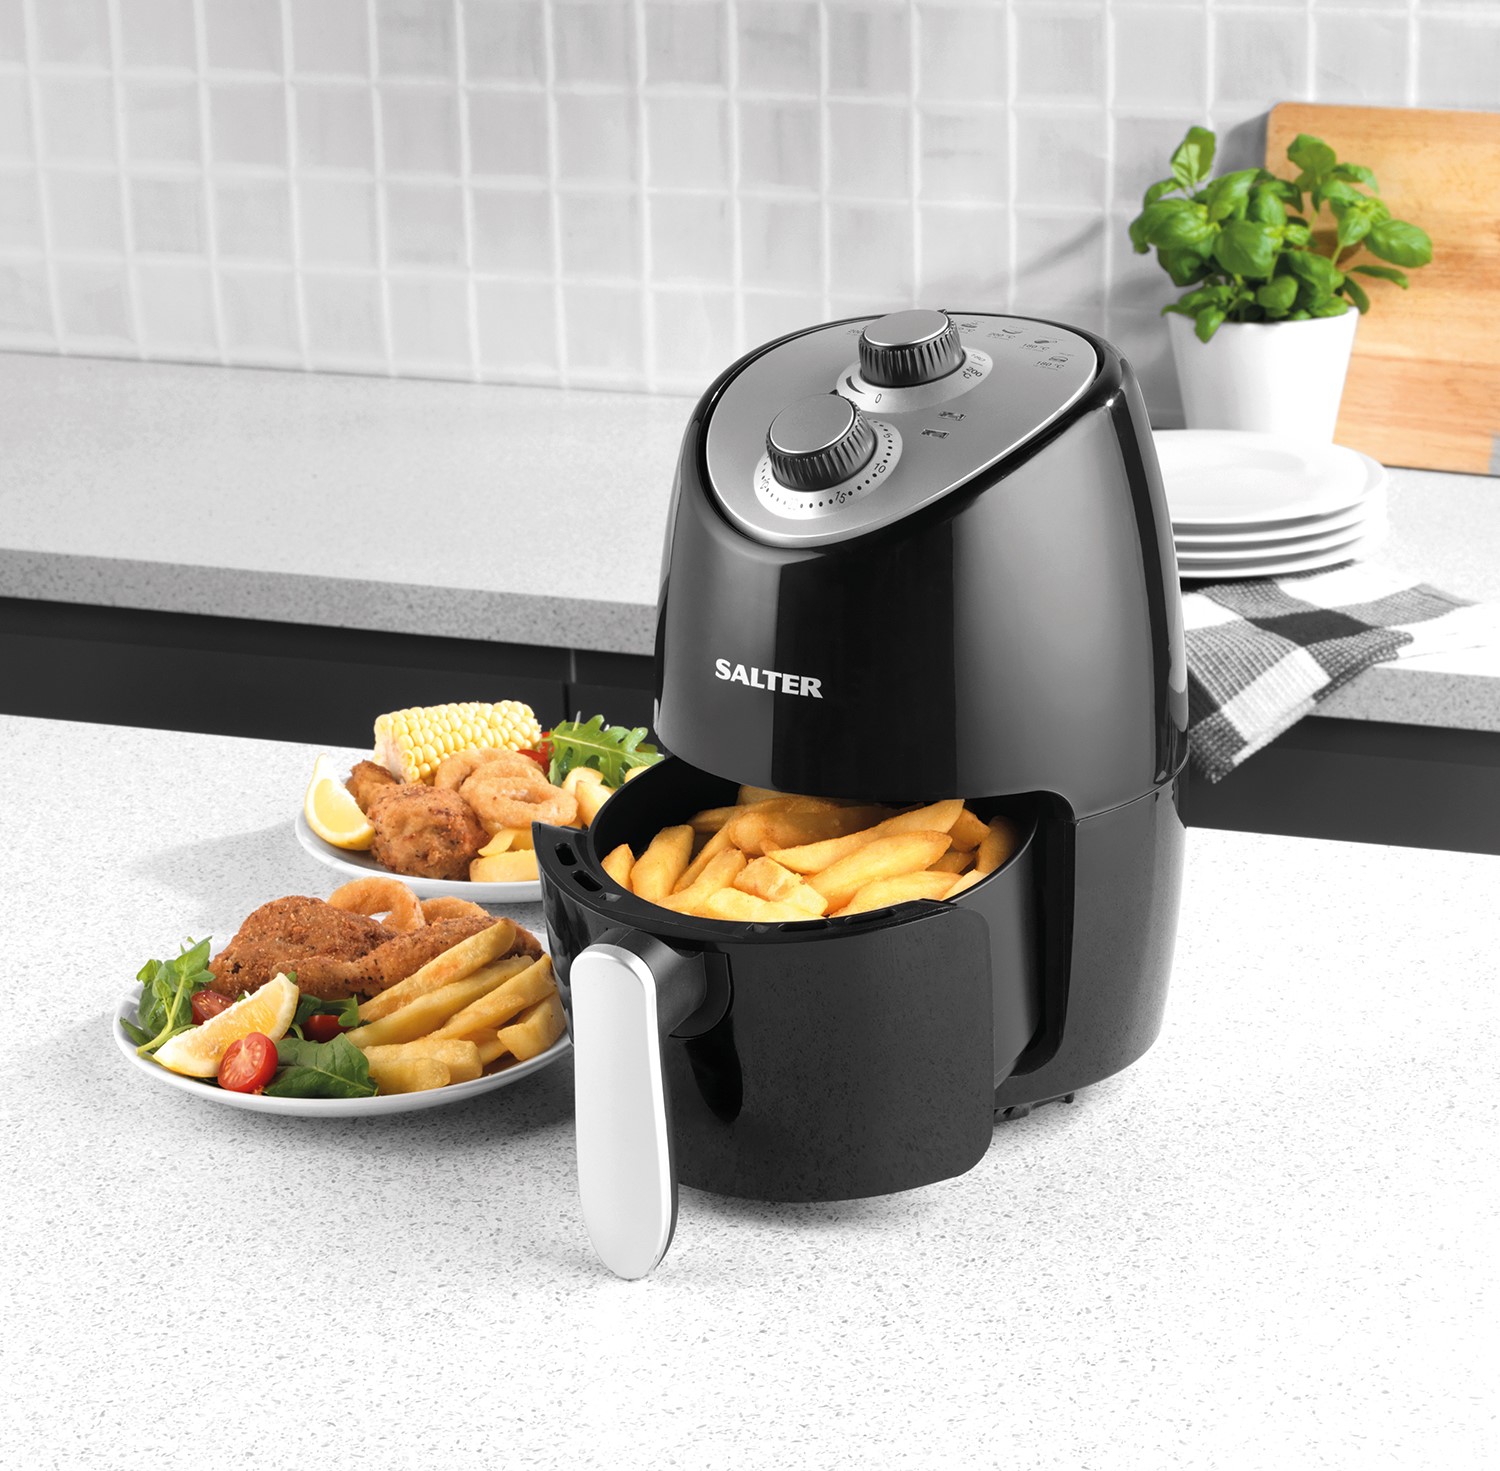 Making perfect chips in a Hot Air Fryer